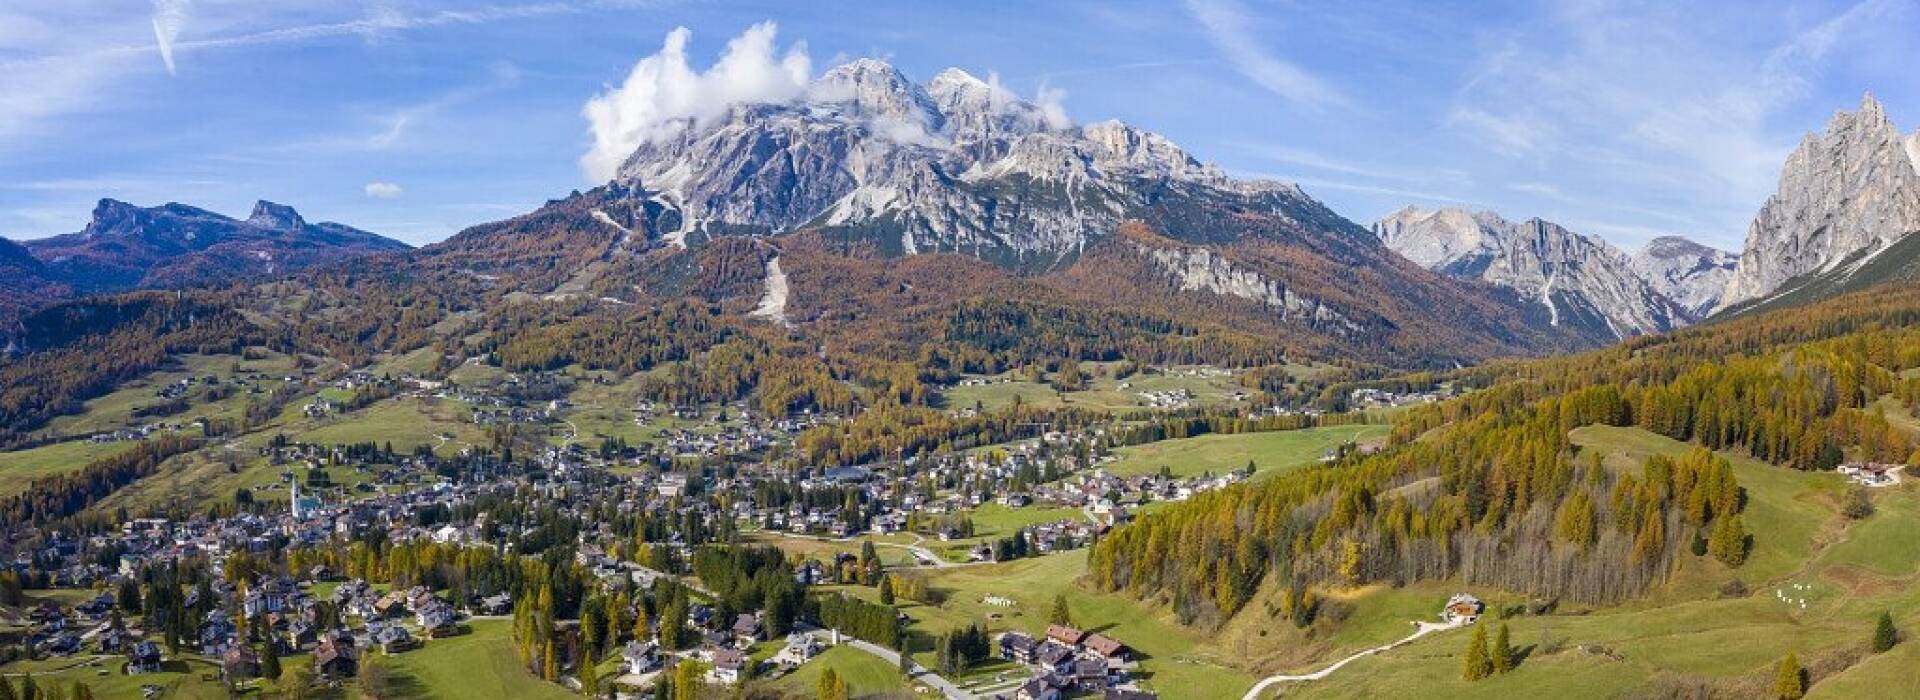 Itineraries in the Dolomites, Unesco Mountains in Italy